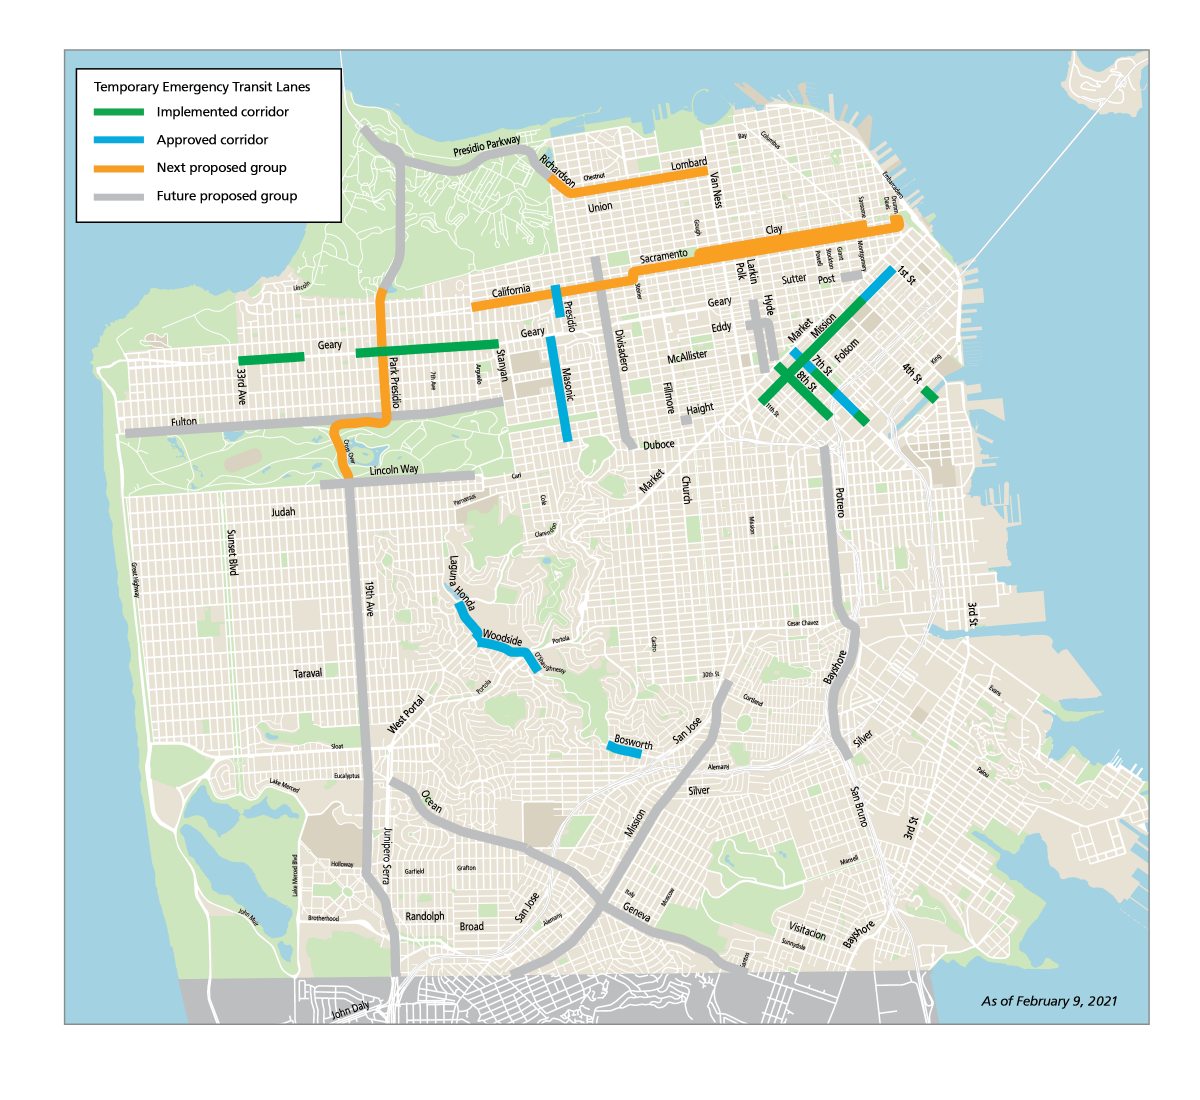 map of corridors where temporary emergency transit lanes are proposed or implemented